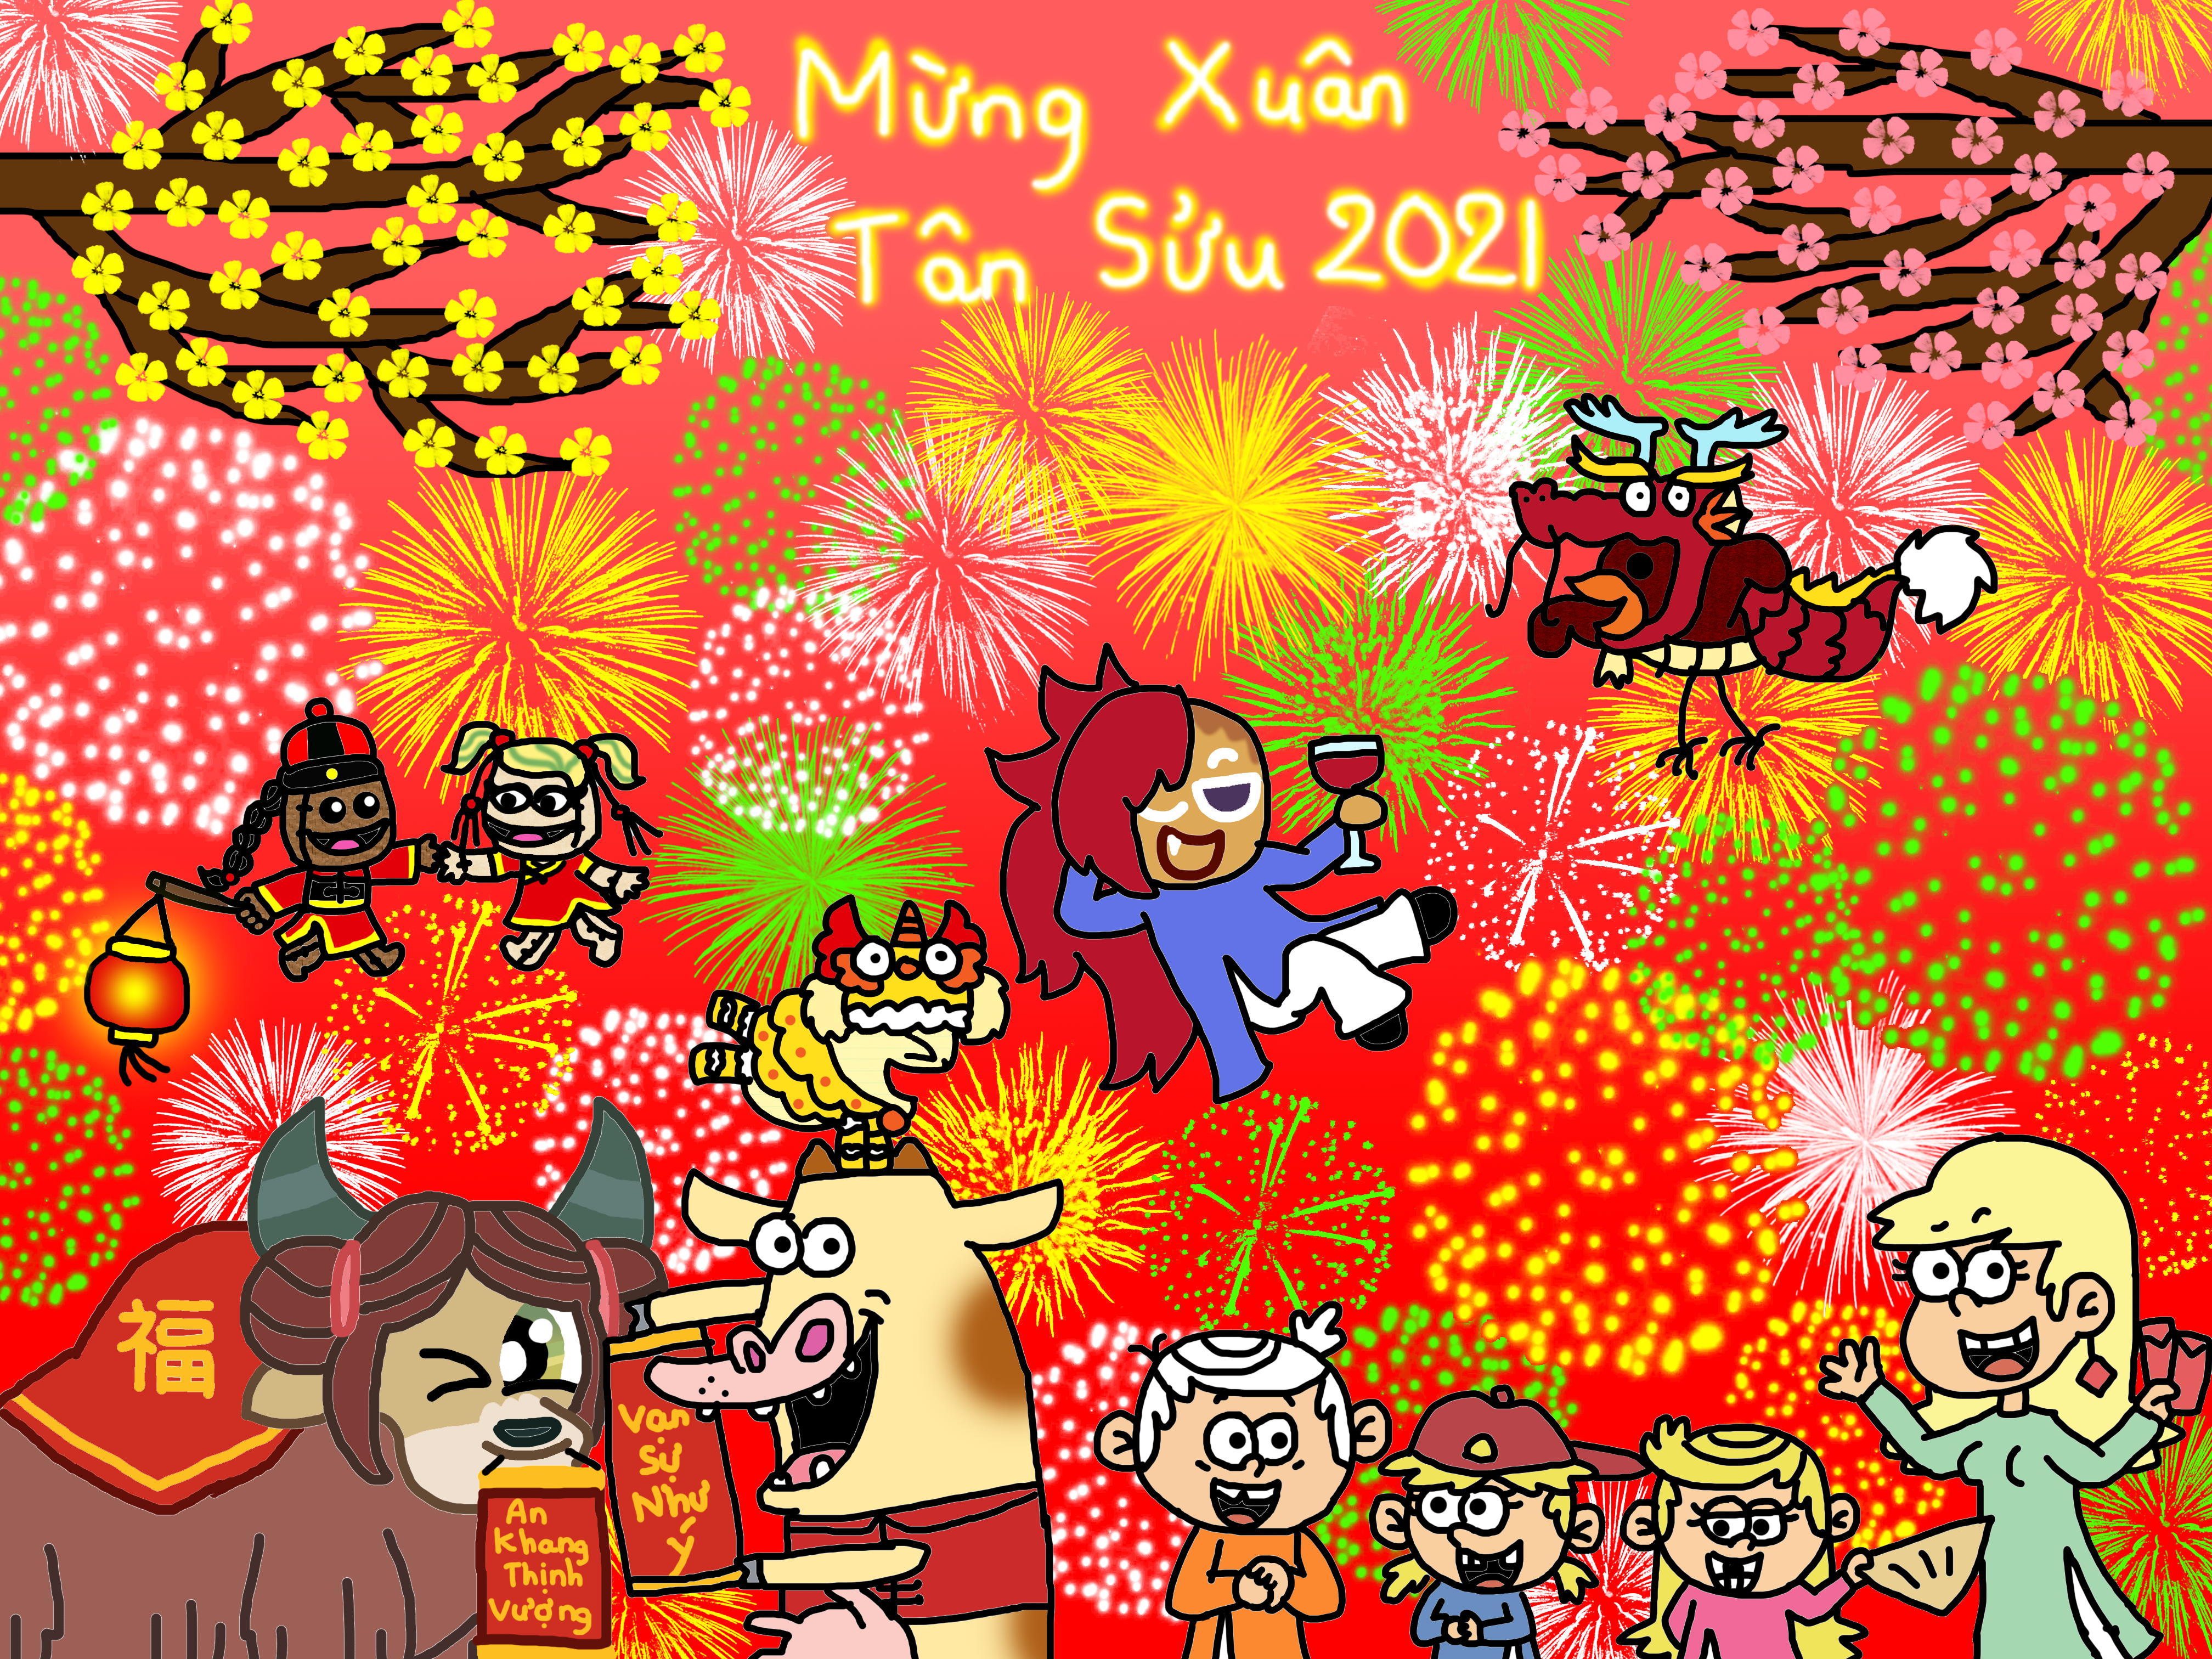 Happy New Chinese Year Ft. Jiafei by sanmoont on DeviantArt